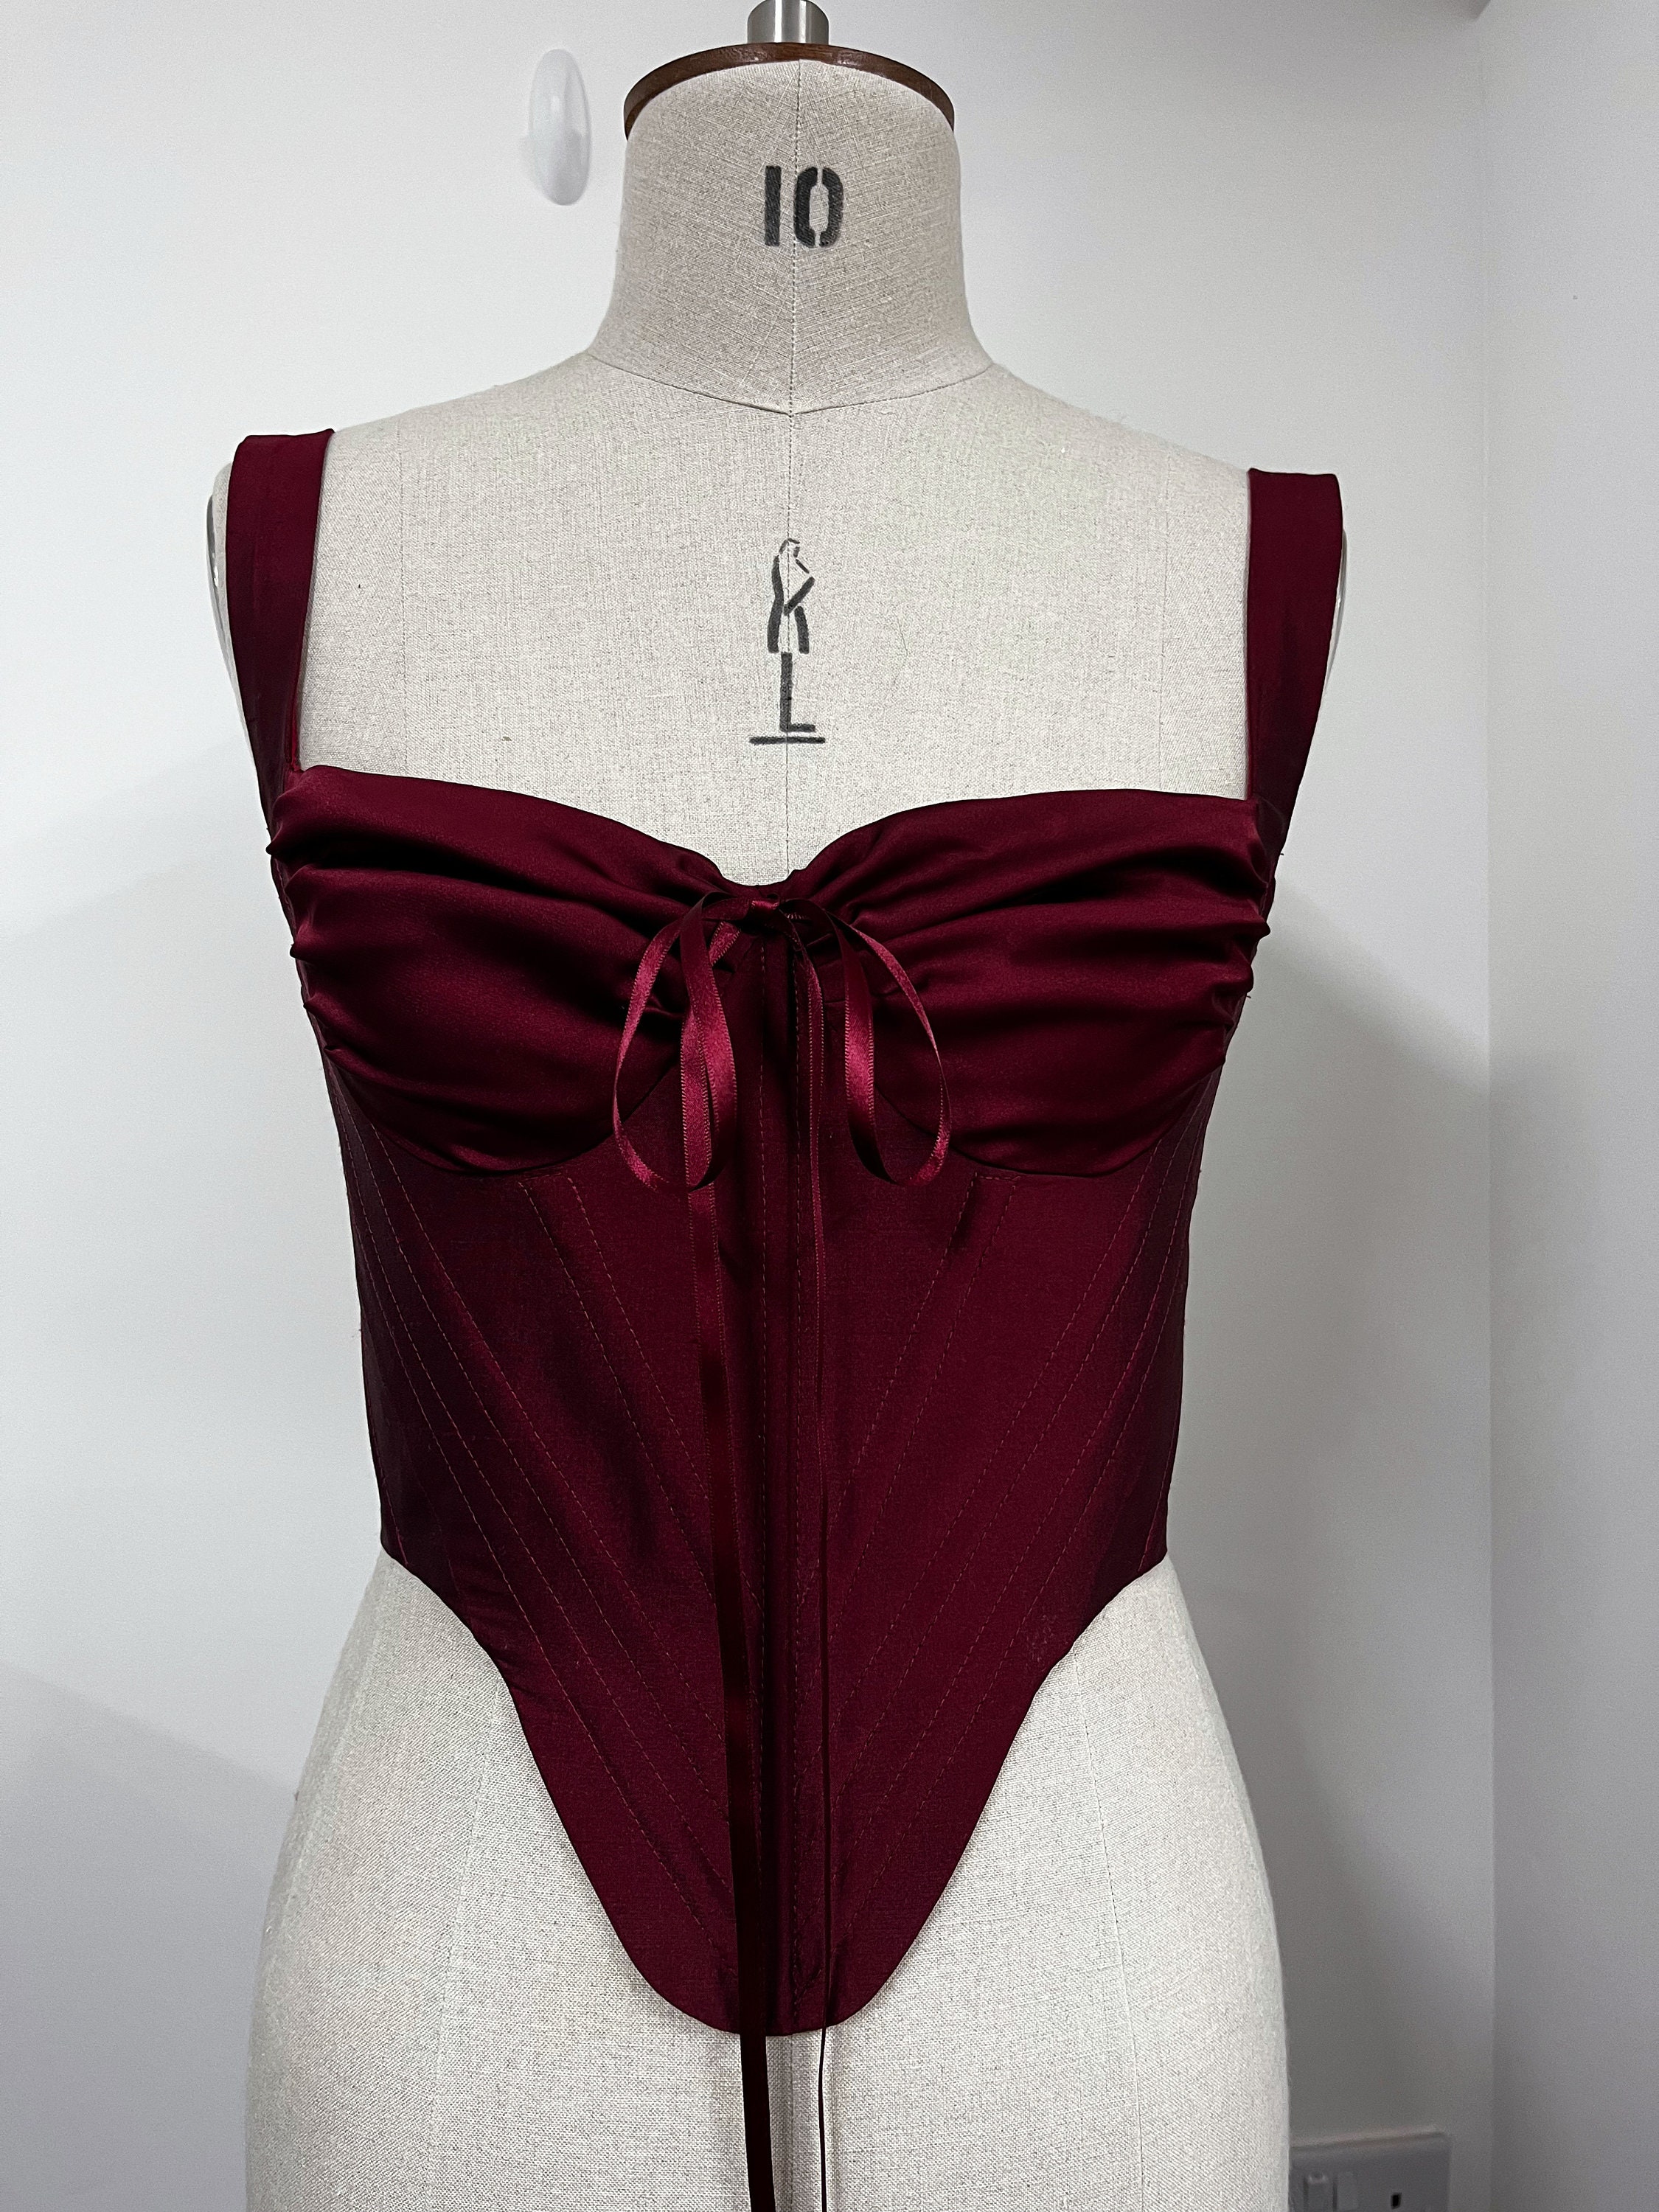 Velvet Real CORSET Red Black OVERBUST Lace Guipure GOTHIC Victorian Vampire  Tight Lacing Wine Waist 